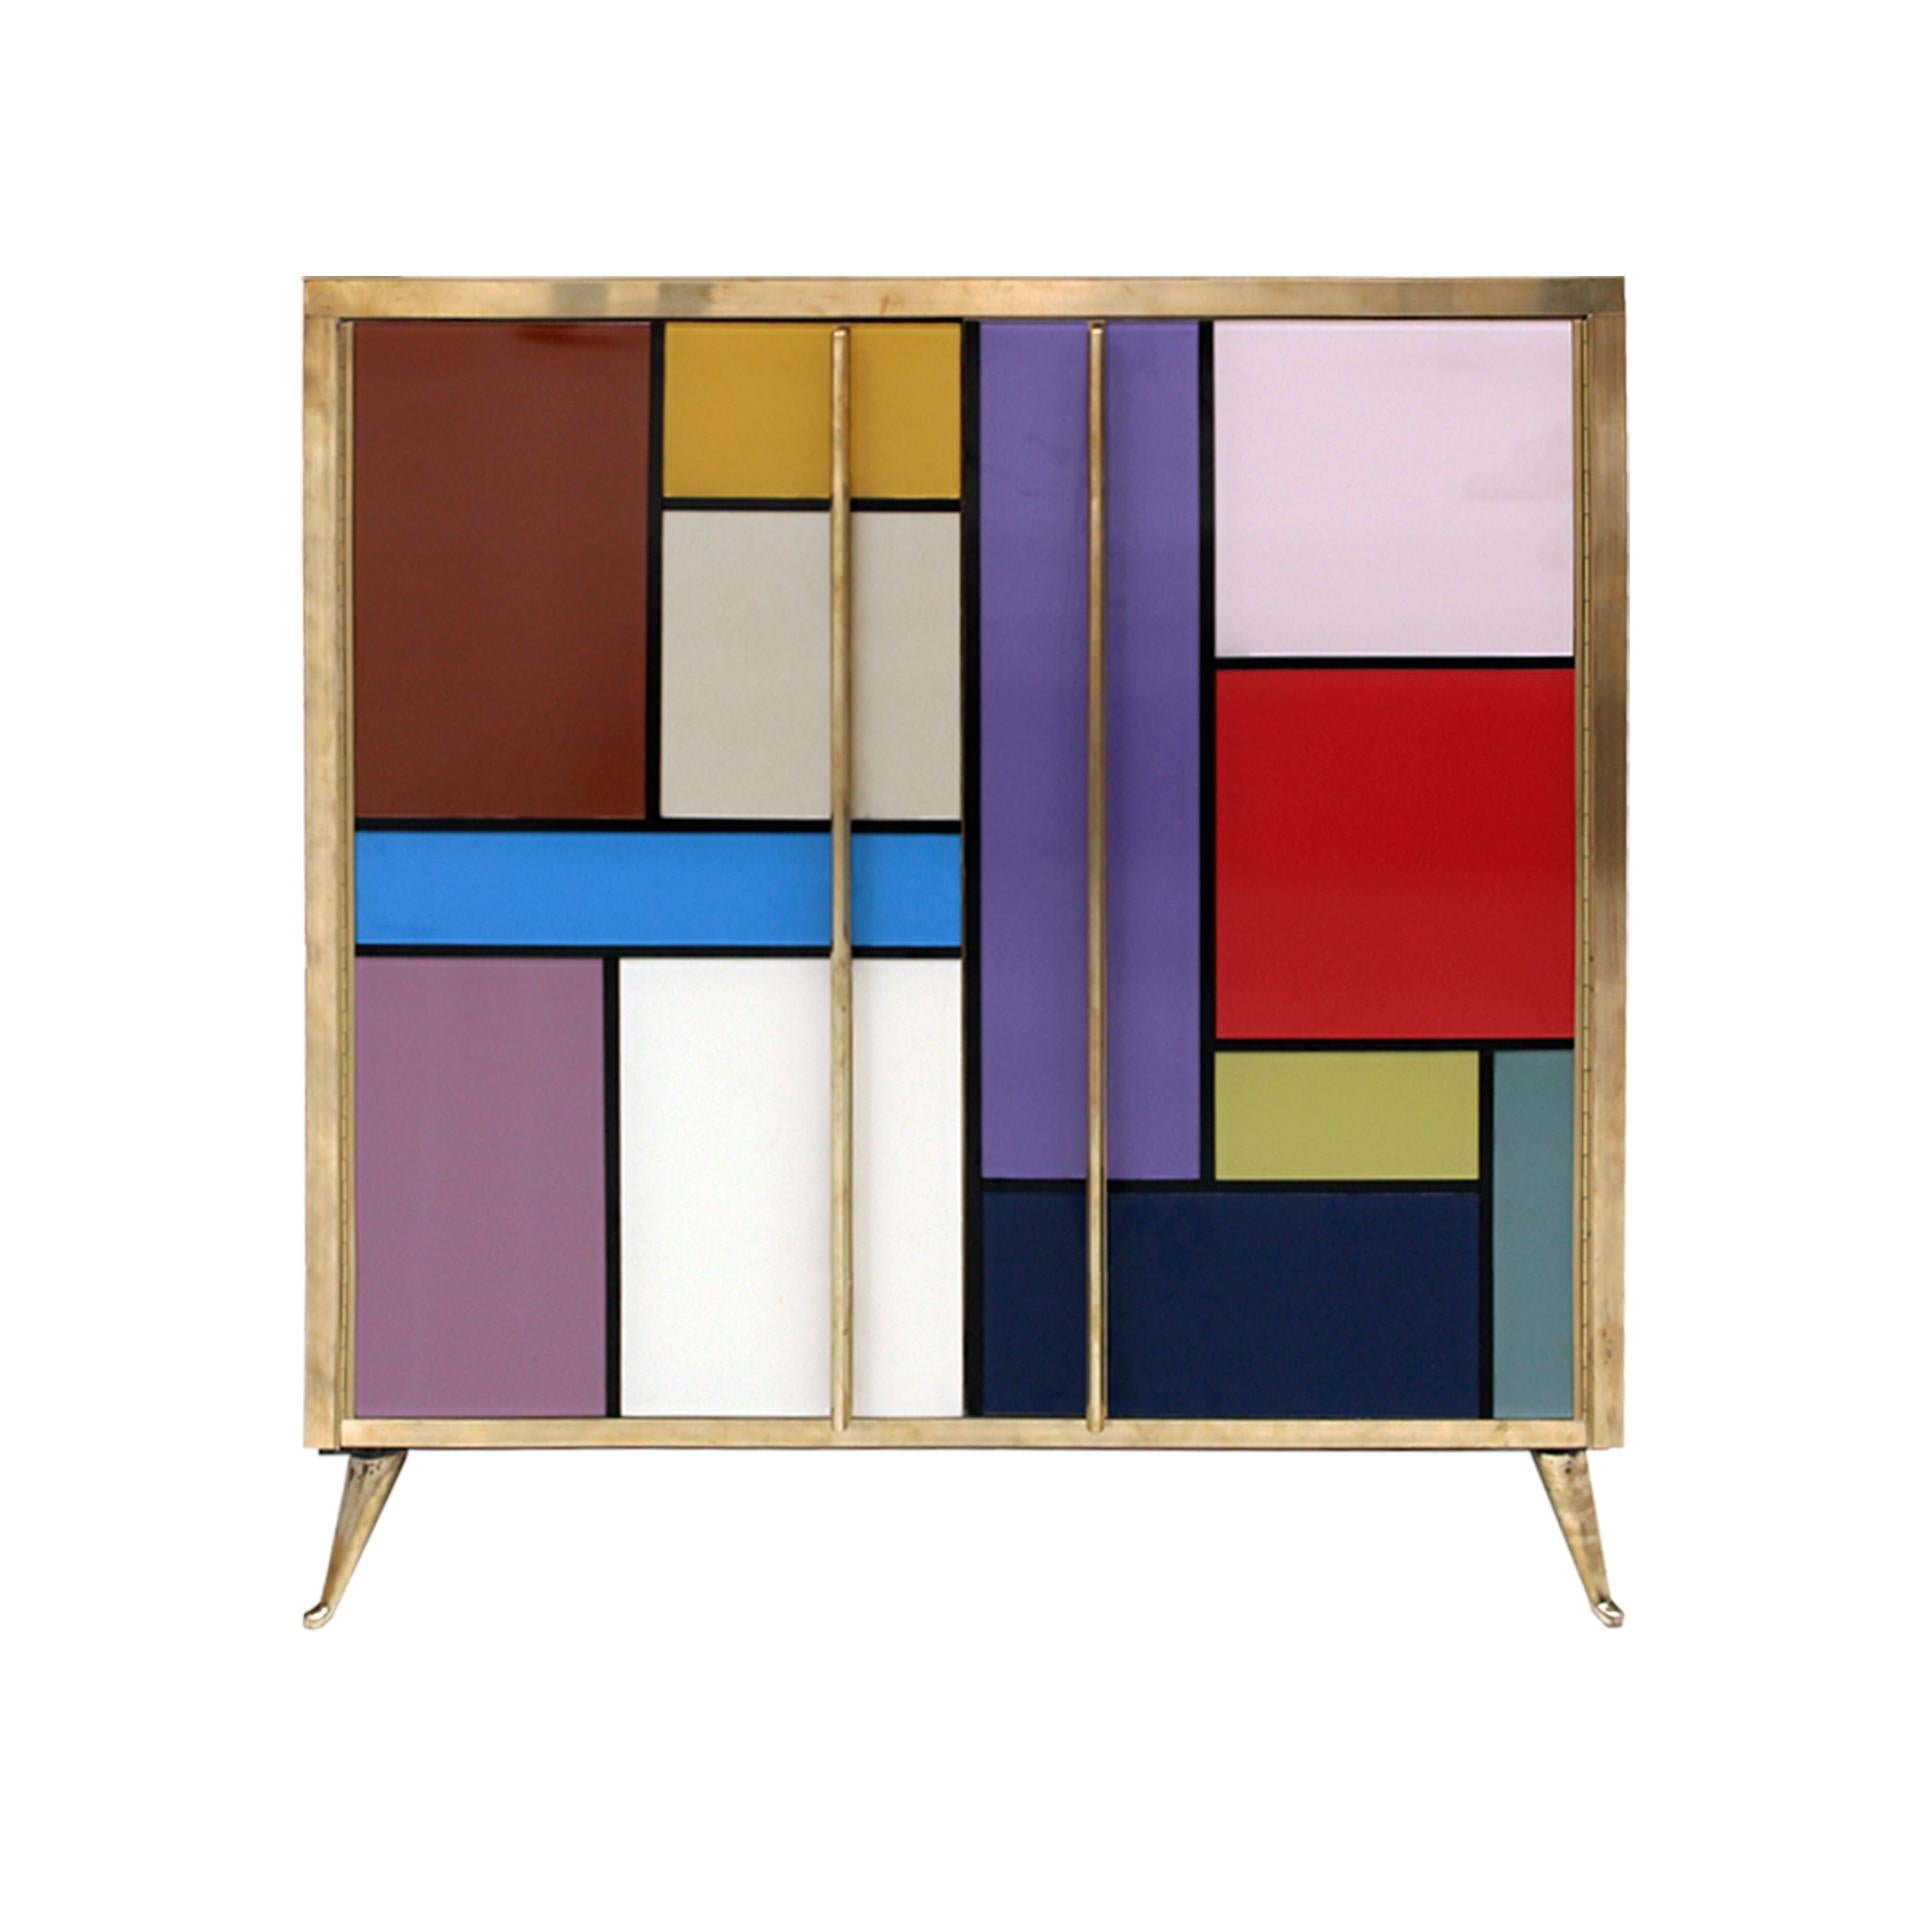 Sideboard composed of two folding doors and one shelve inside. Original structure from 1950s made of solid wood and coated with colored glass. Details, handles and legs made of brass.

Production can last between 5 and 6 weeks.

Our main target is